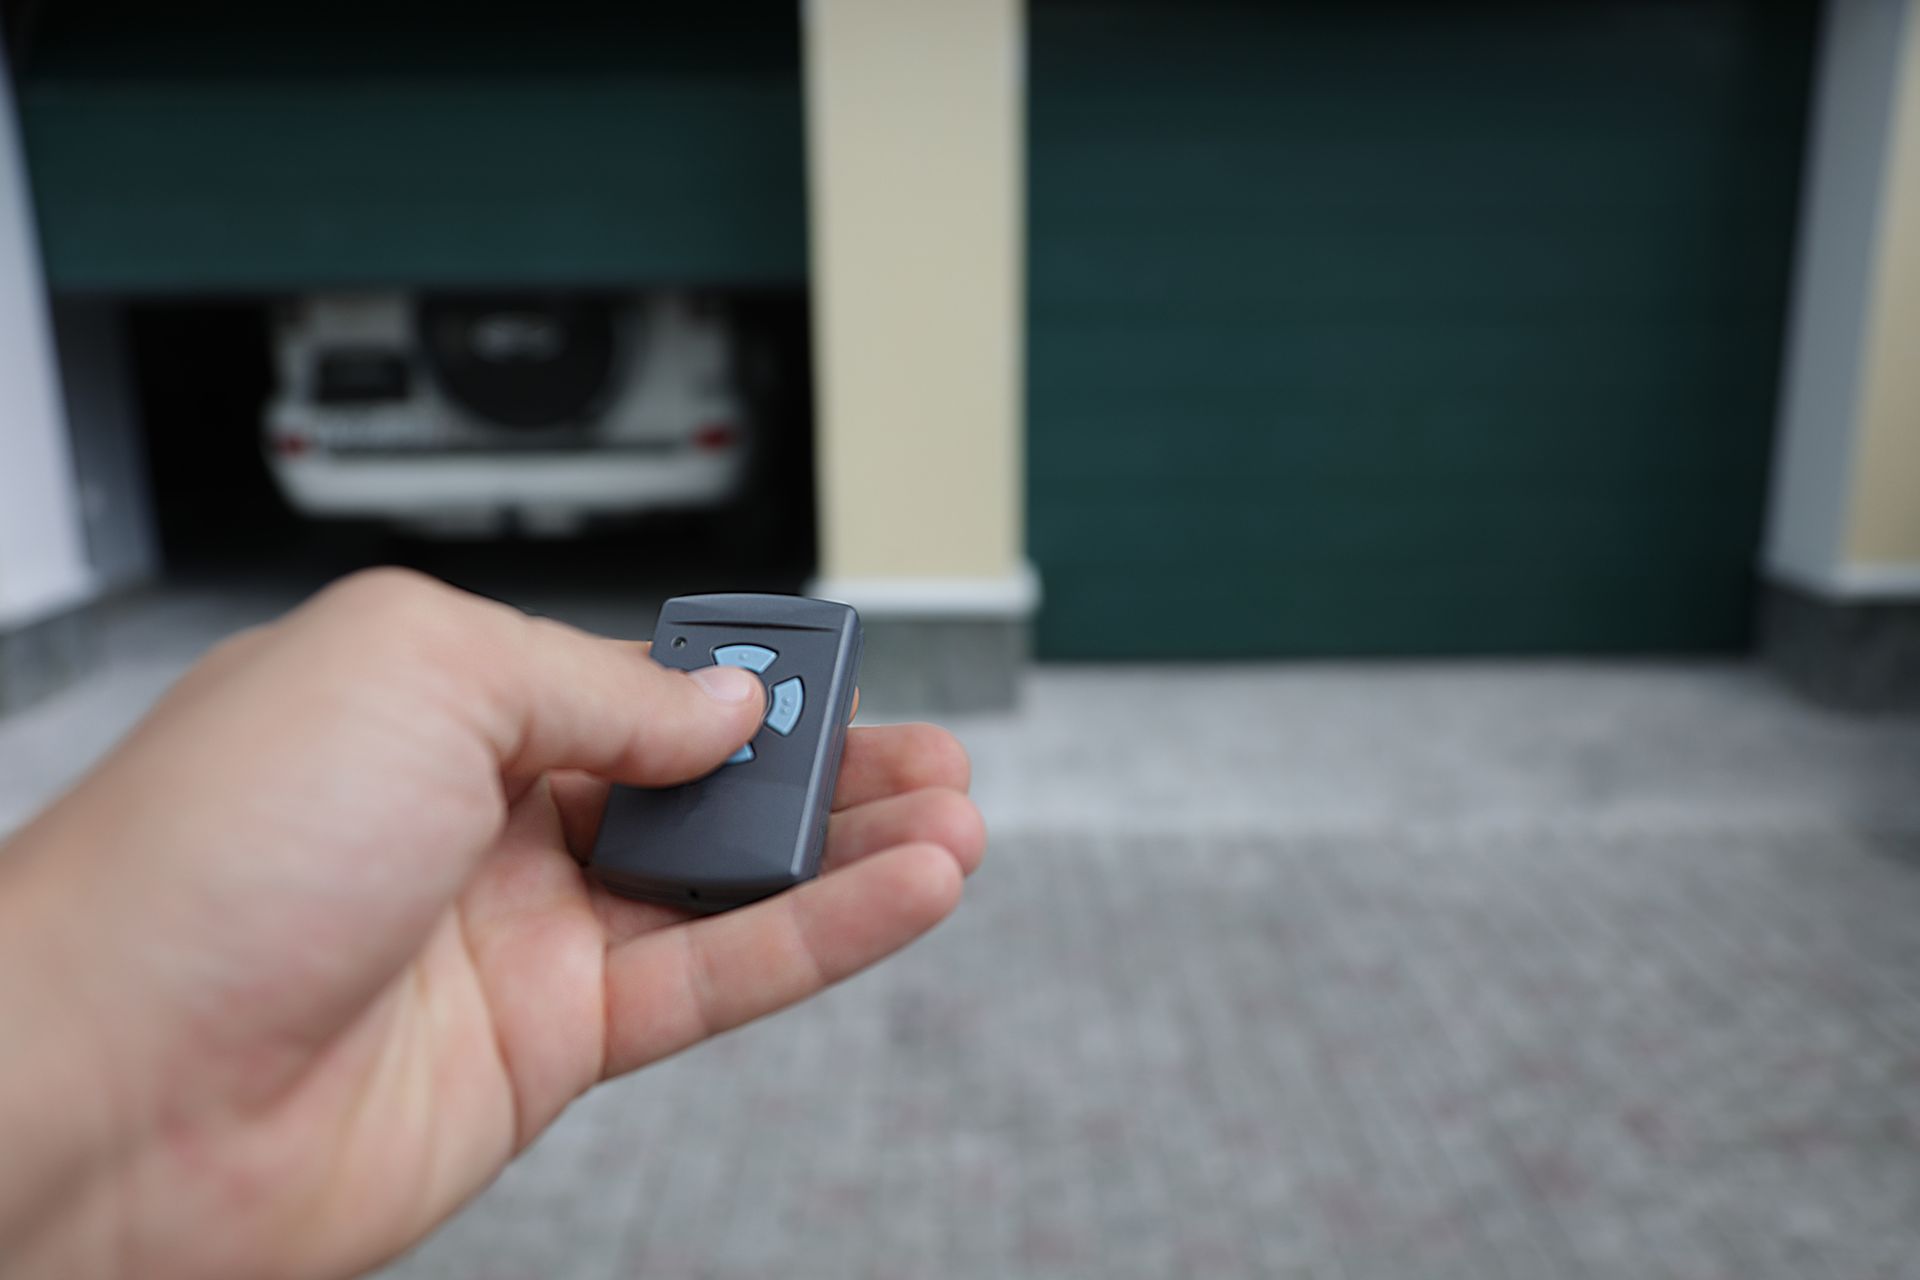 A person is holding a remote control in front of a garage door.